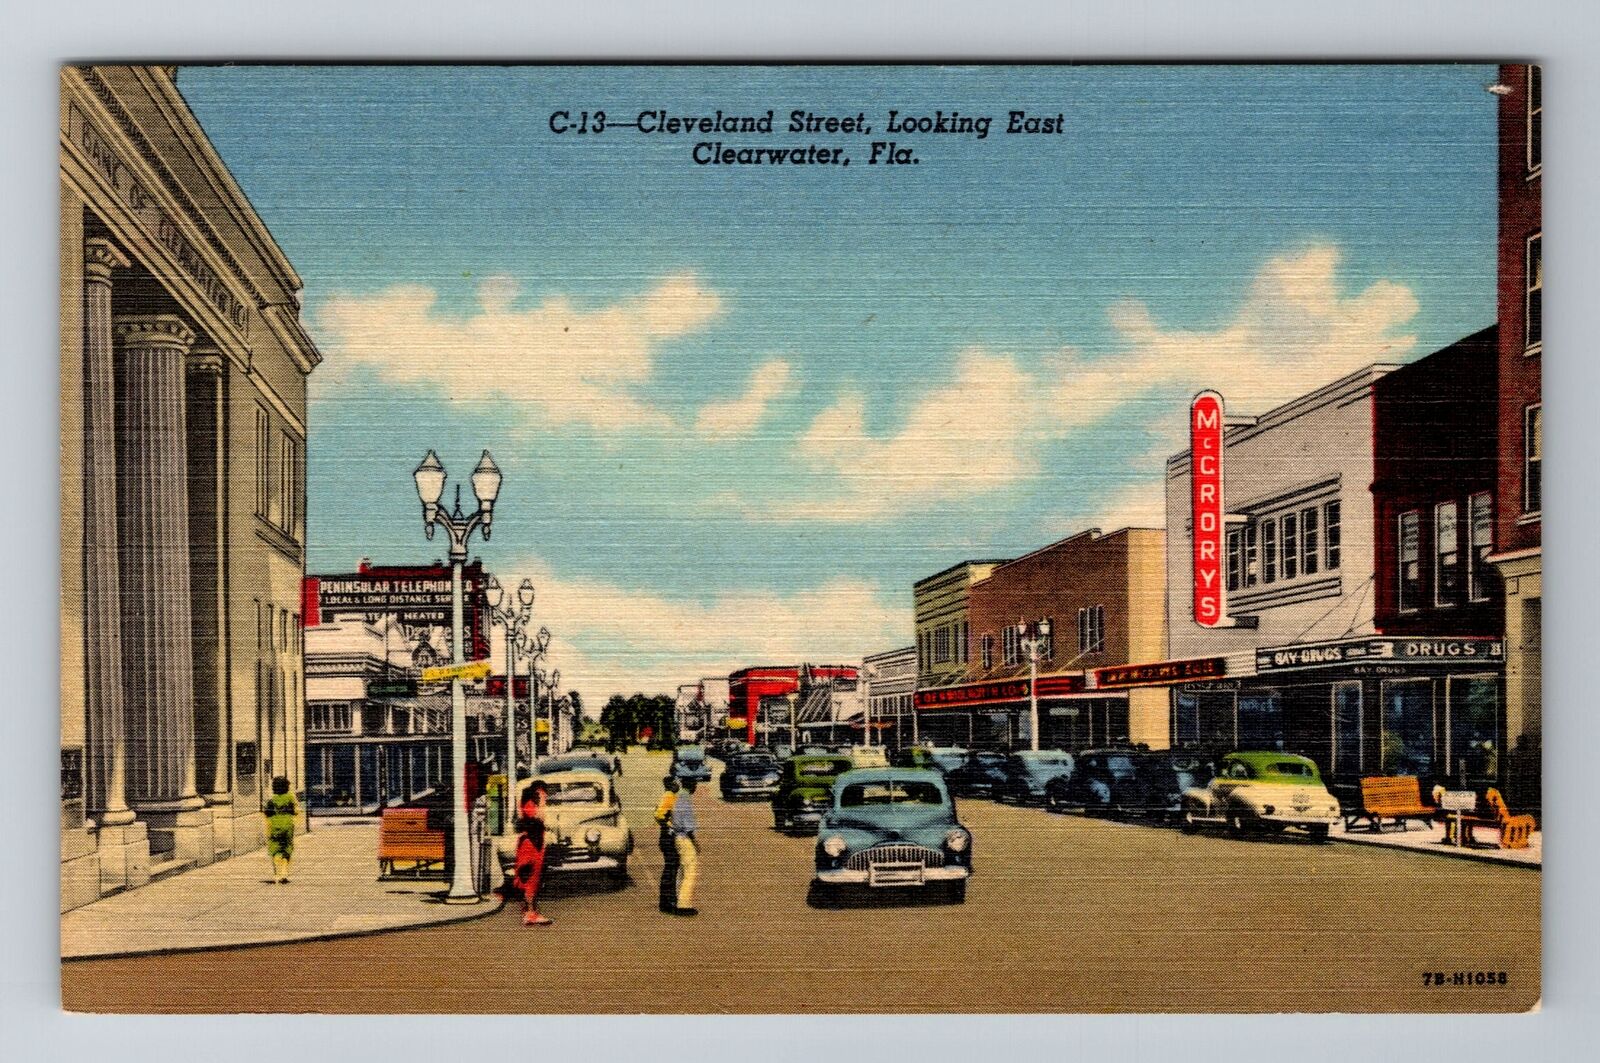 Clearwater FL-Florida, Cleveland Street Looking East, Antique Vintage Postcard